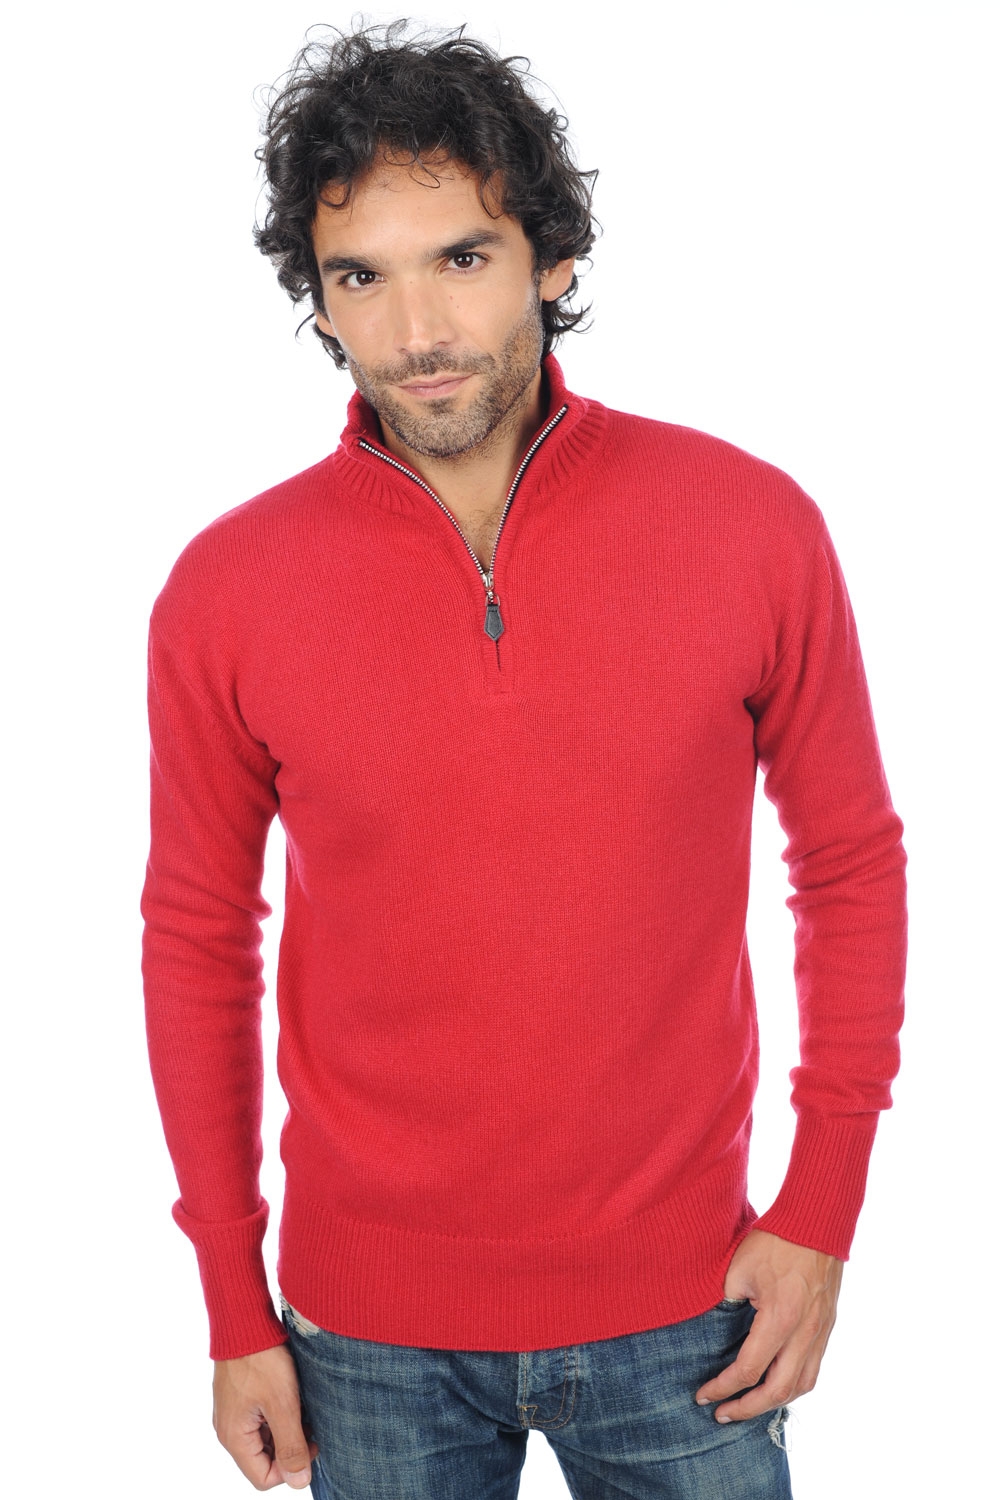 Cashmere men polo style sweaters donovan blood red xs